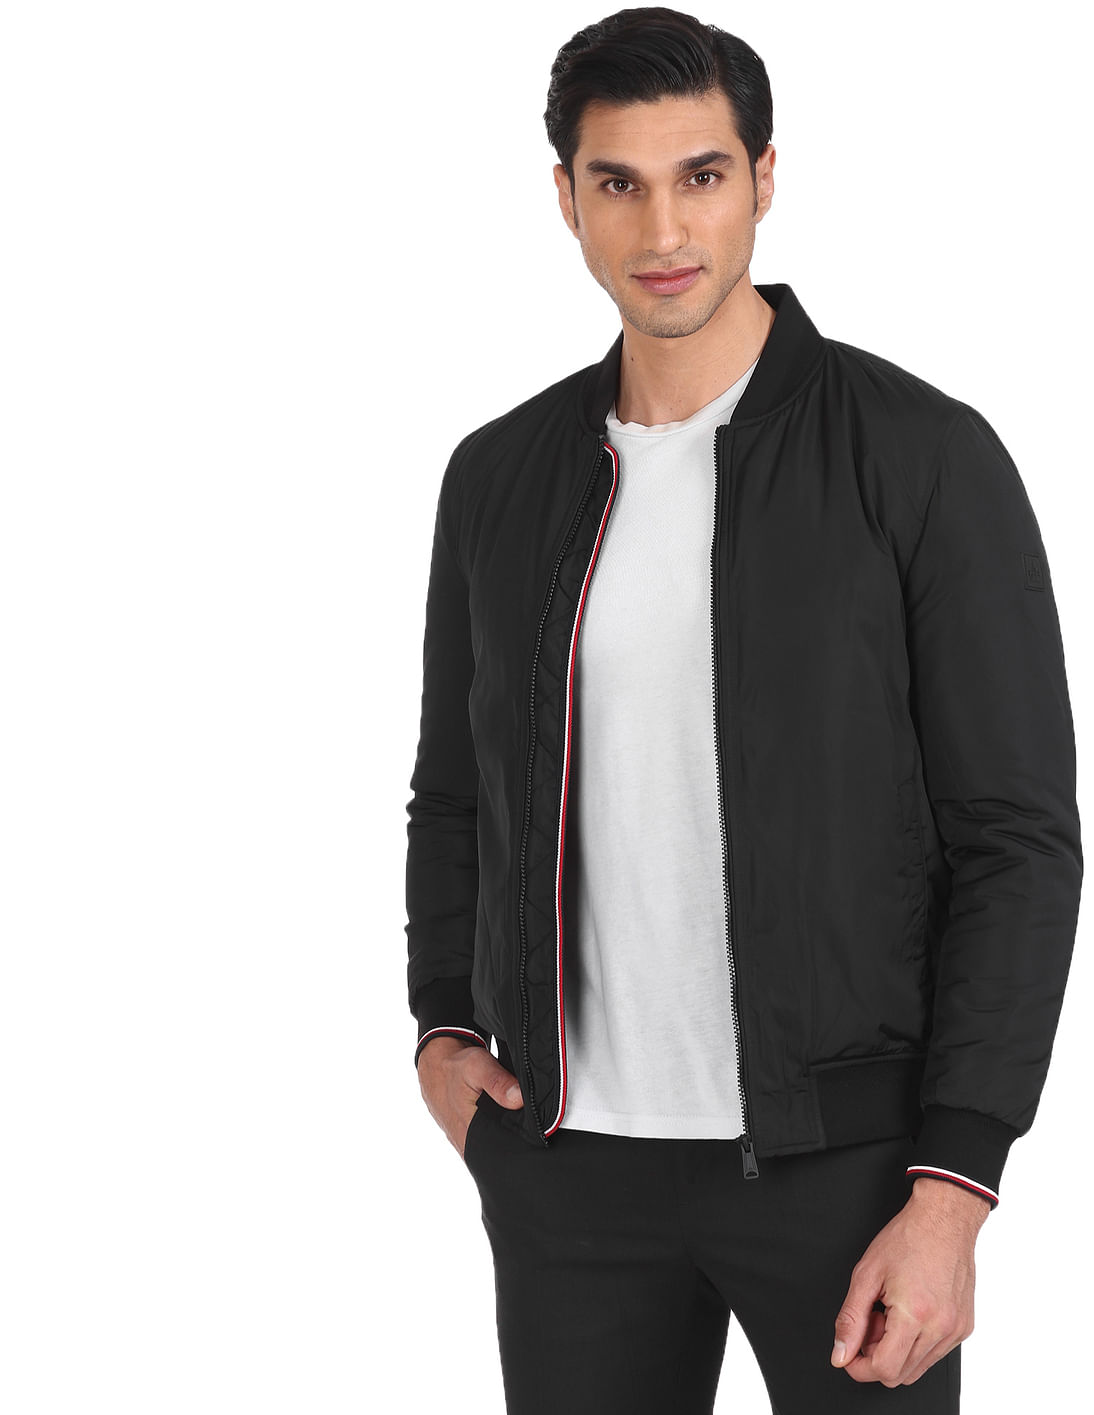 Buy Arrow Sports Stand Collar Solid Jacket - NNNOW.com